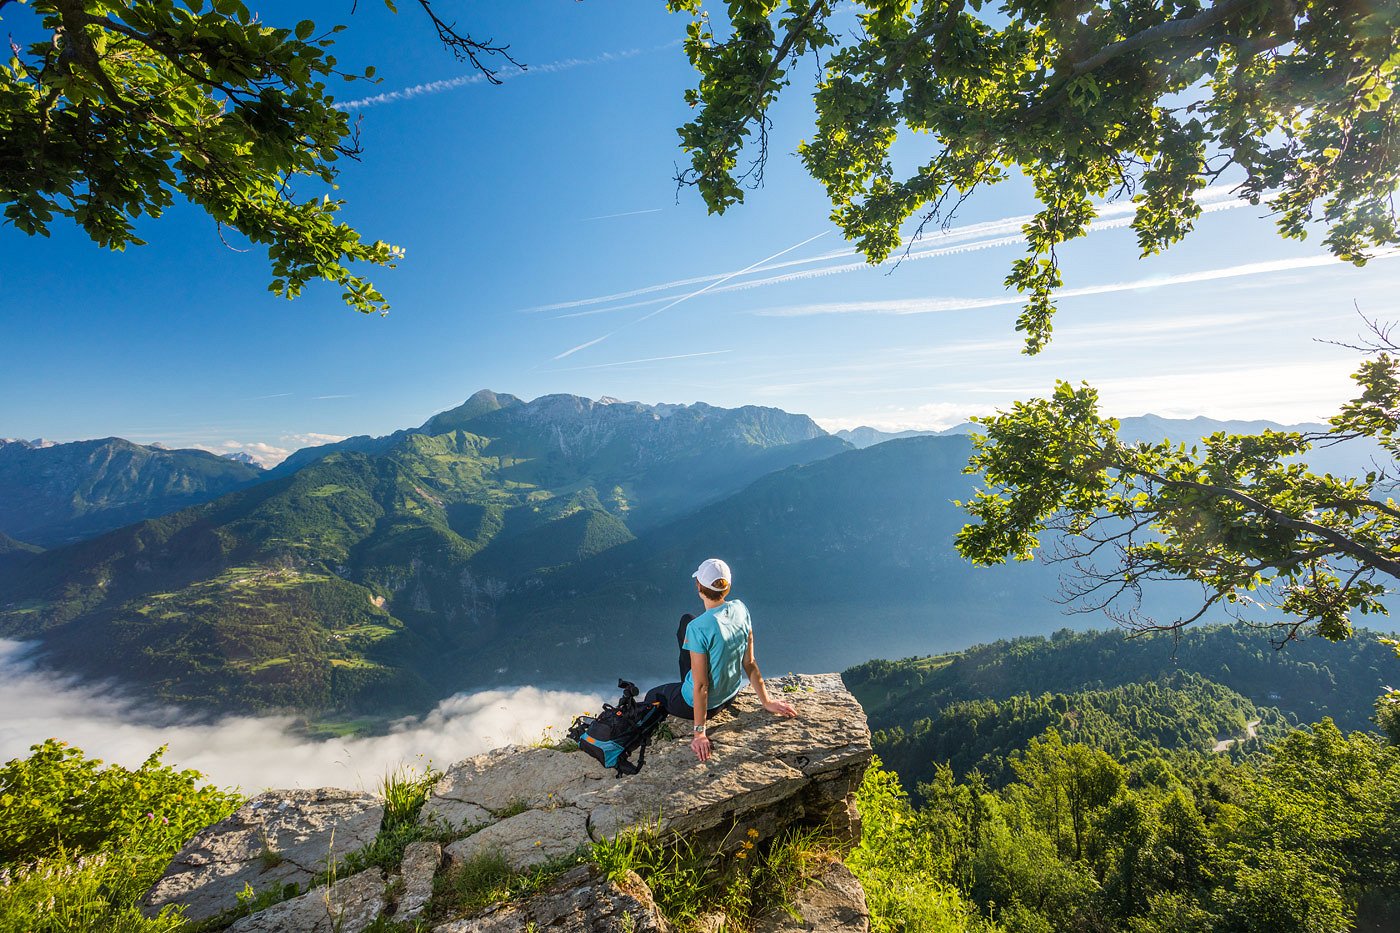 The hiker rests on a rock with a view of the Soča Valley